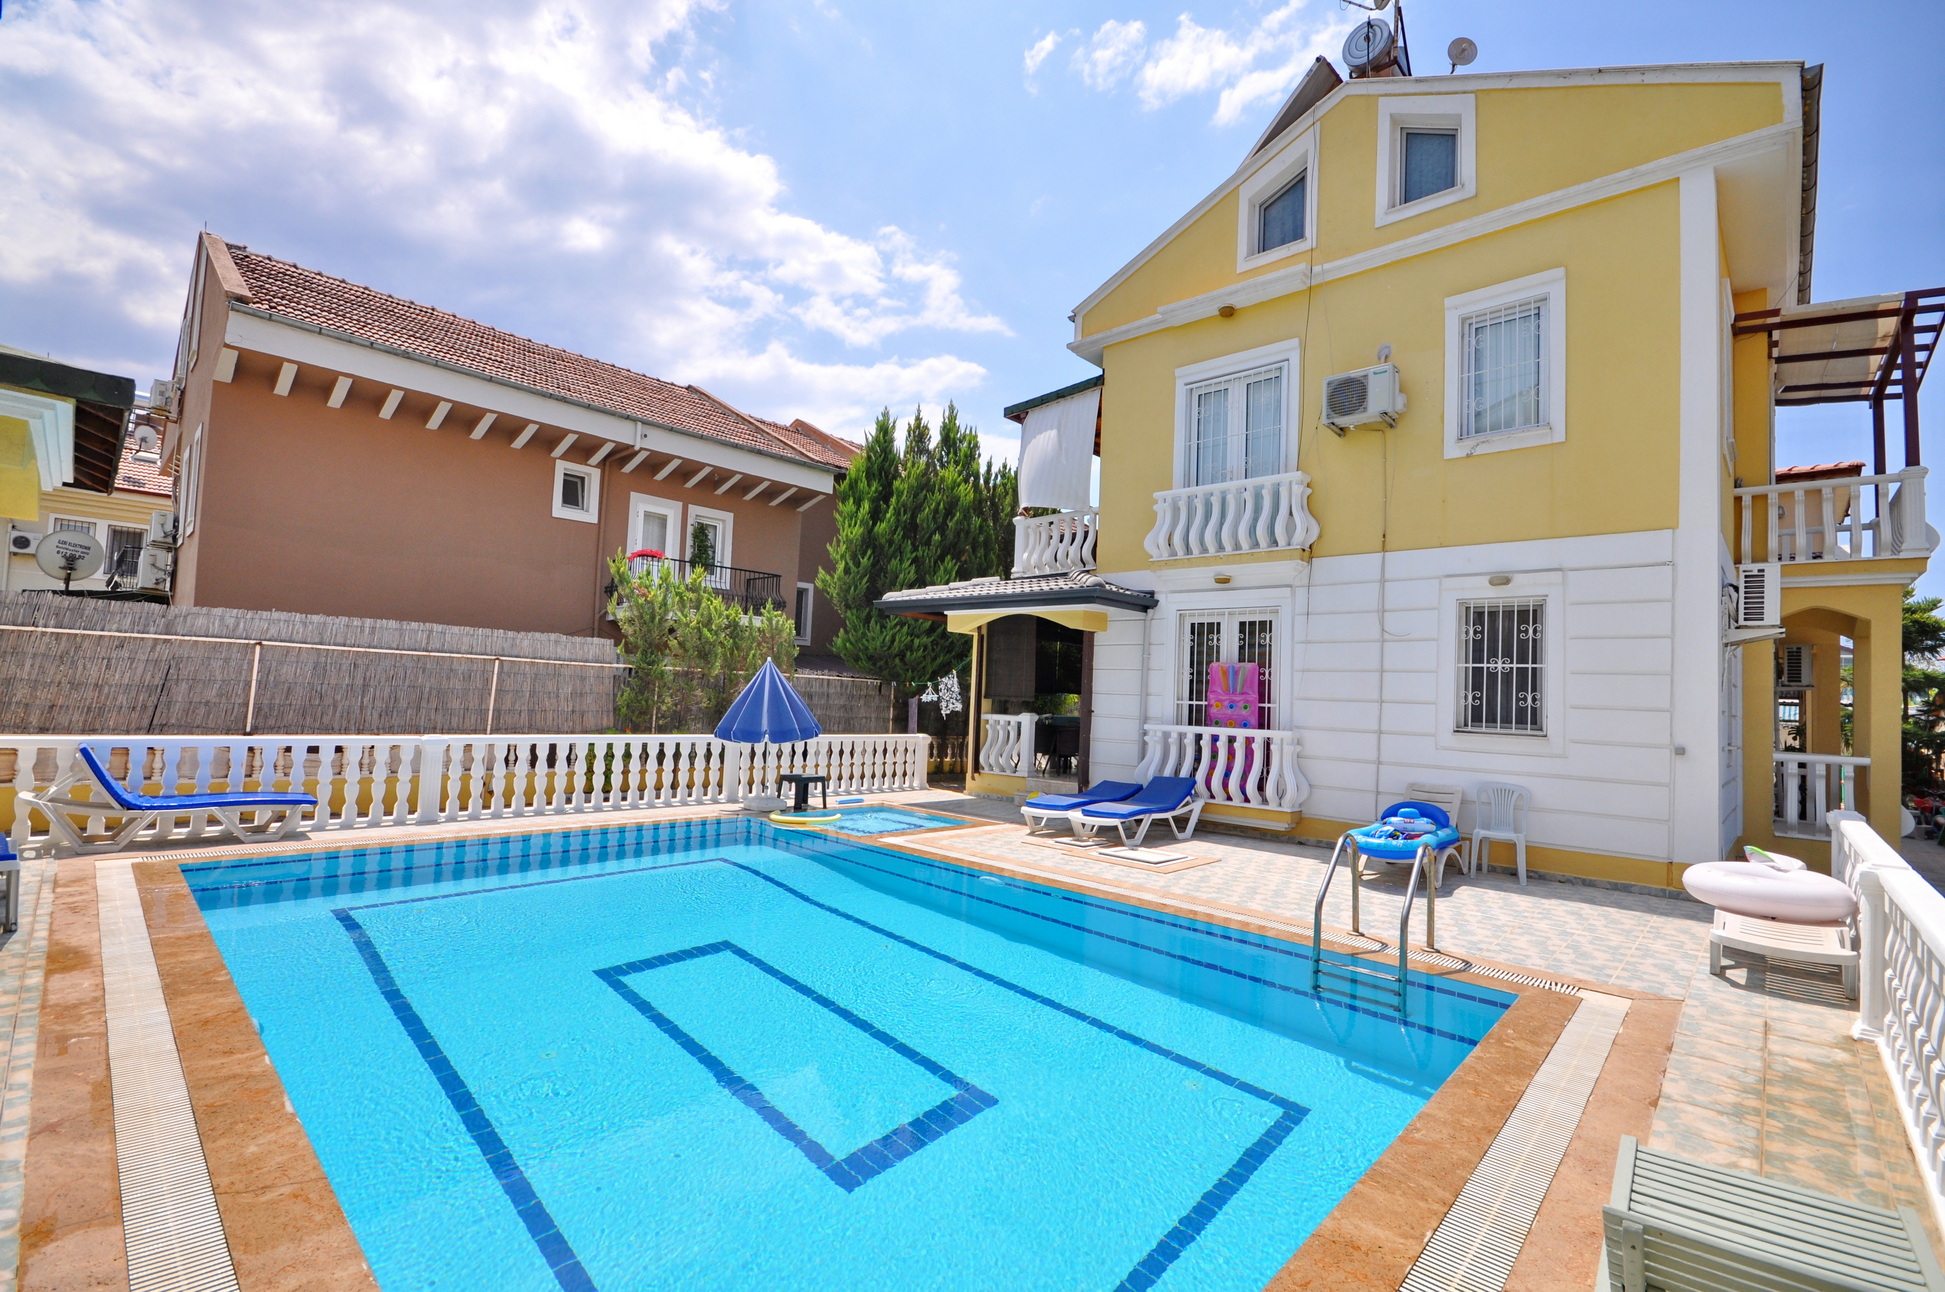 3 Bedroom First Floor Aparment with Communal Pool , Very Close to the Promenade